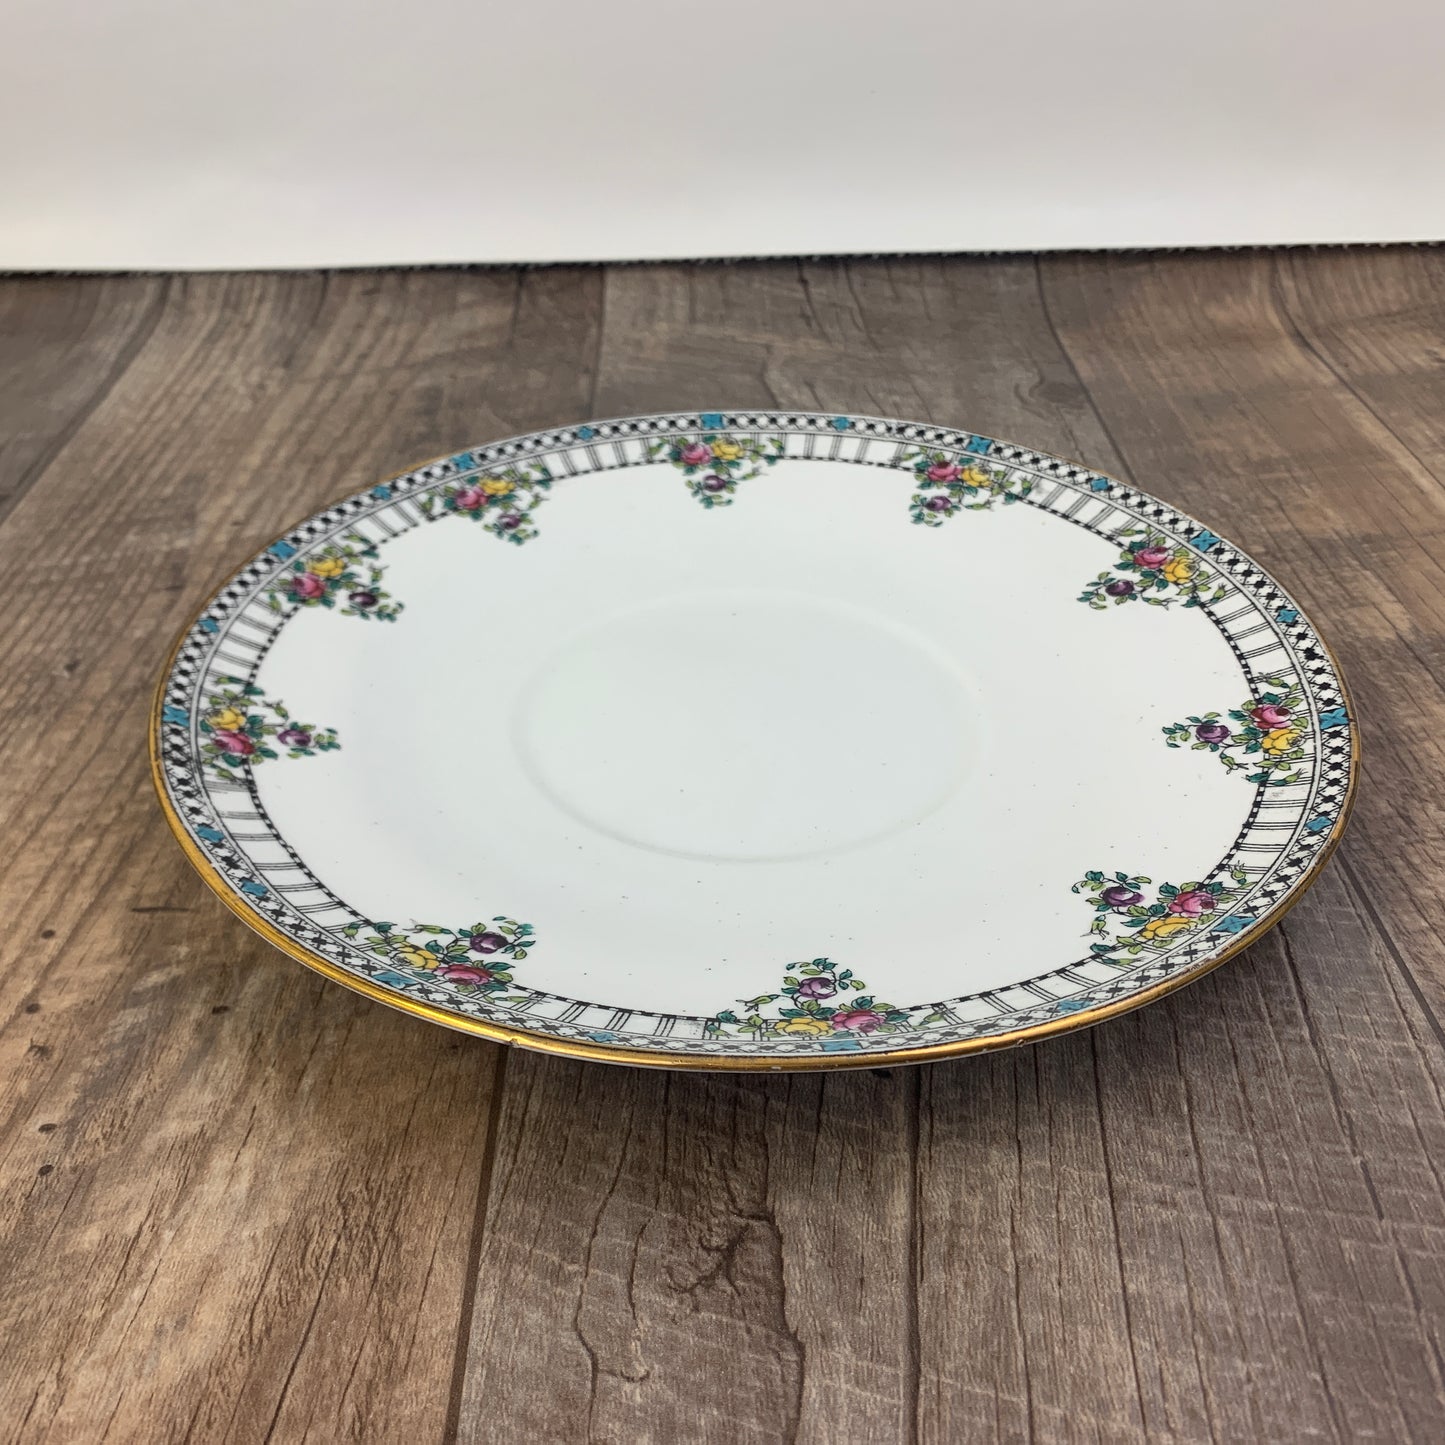 Antique Porcelain Plate with Black Border and Hand Painted Flowers Wildblood, Heath & Sons